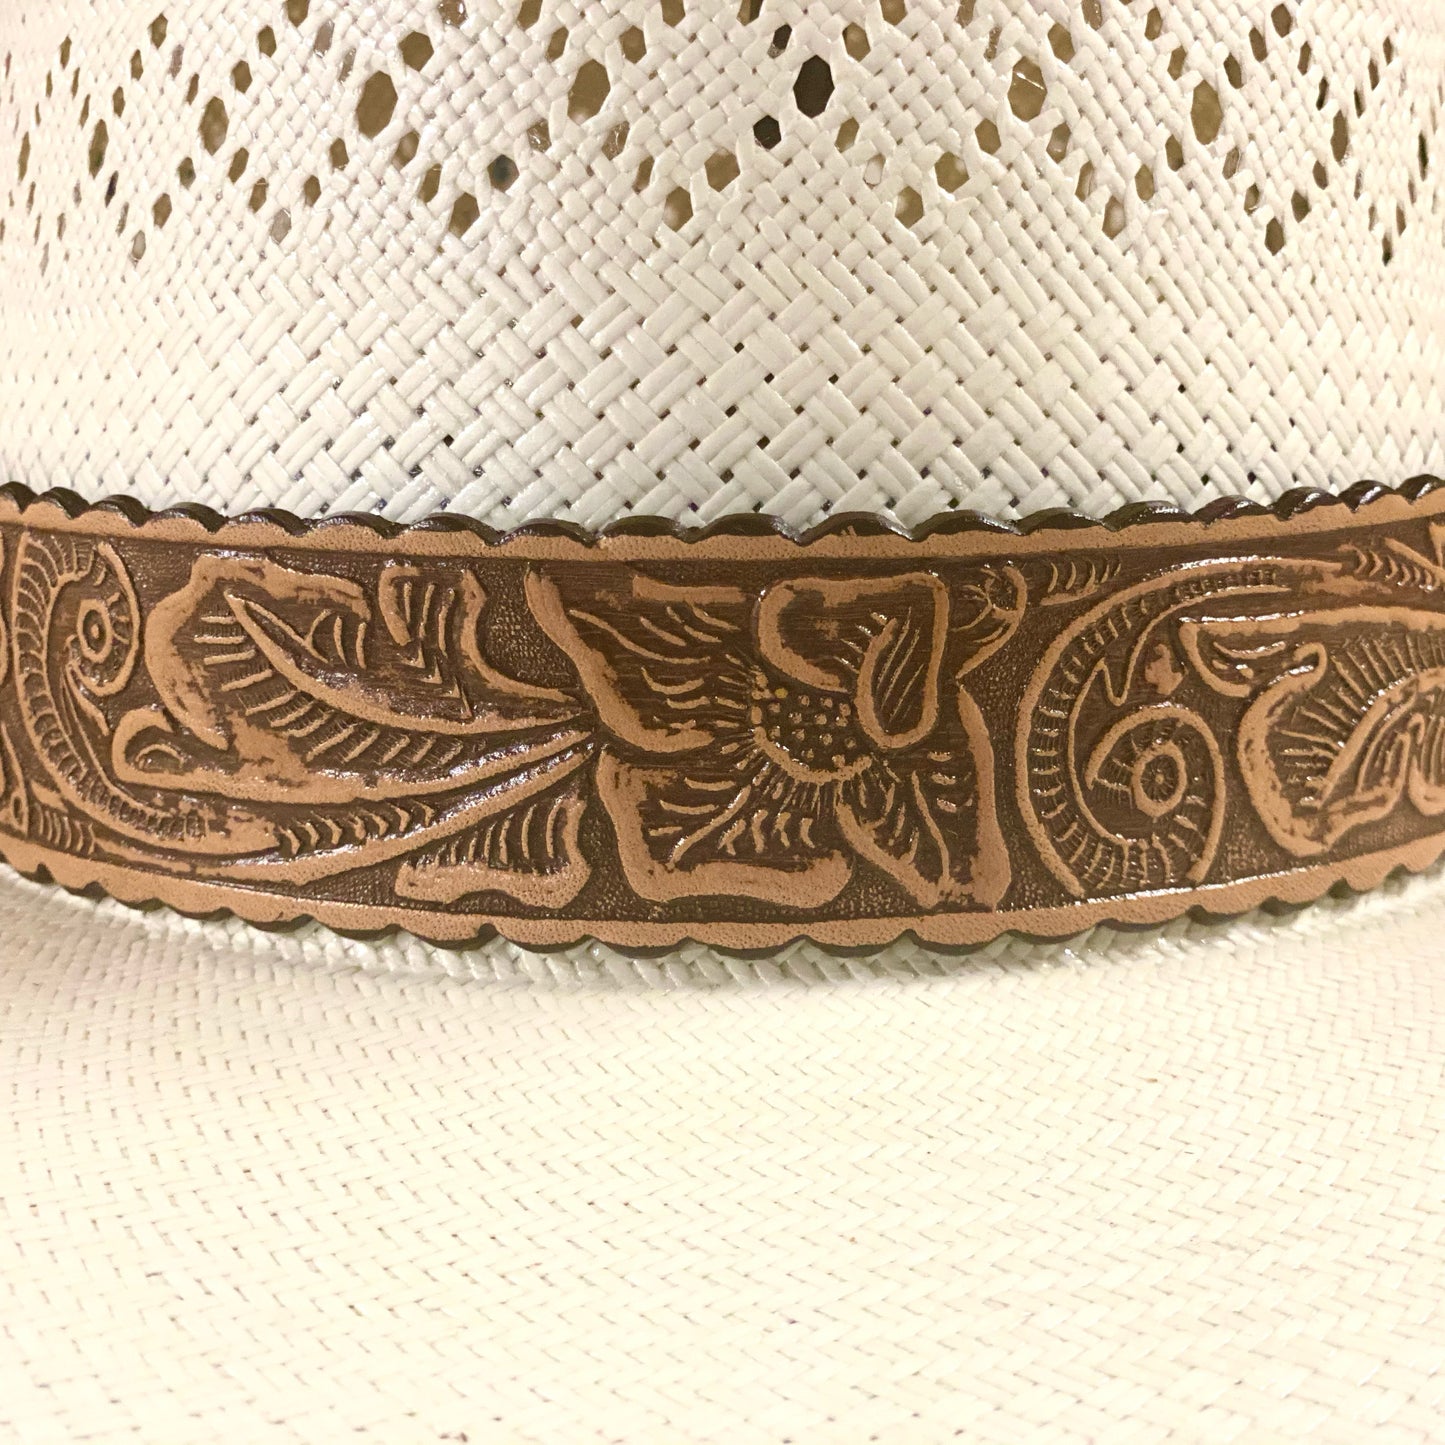 Hatband HB75-TN | 1 1/4" Leather Carved Tan